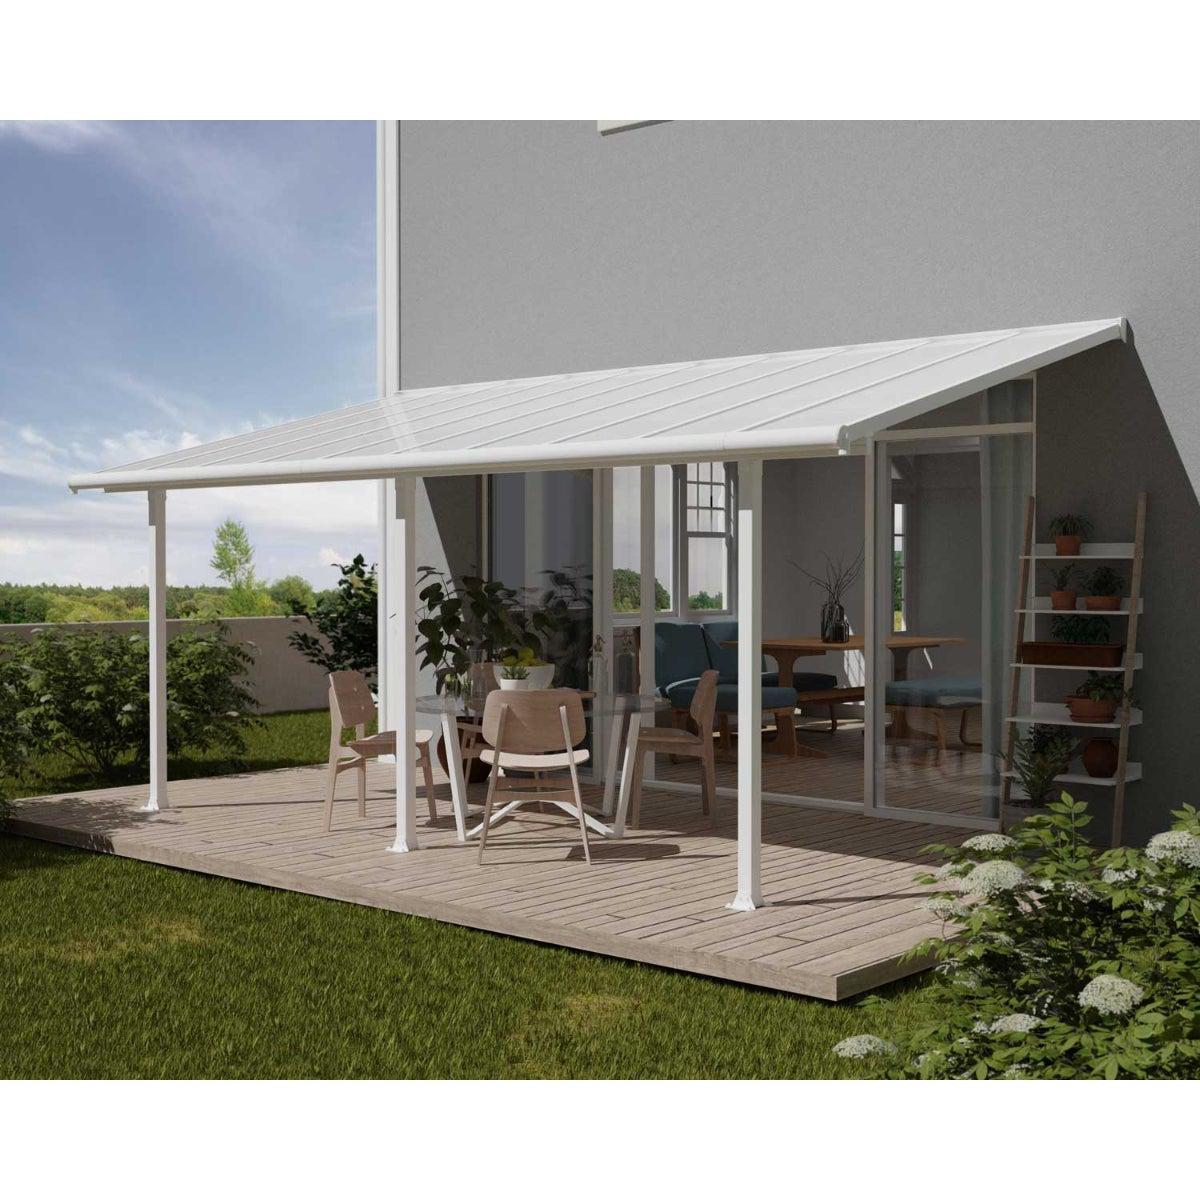 Olympia Patio Covers 10 x 10 ft. | Palram-Canopia - Delightful Yard